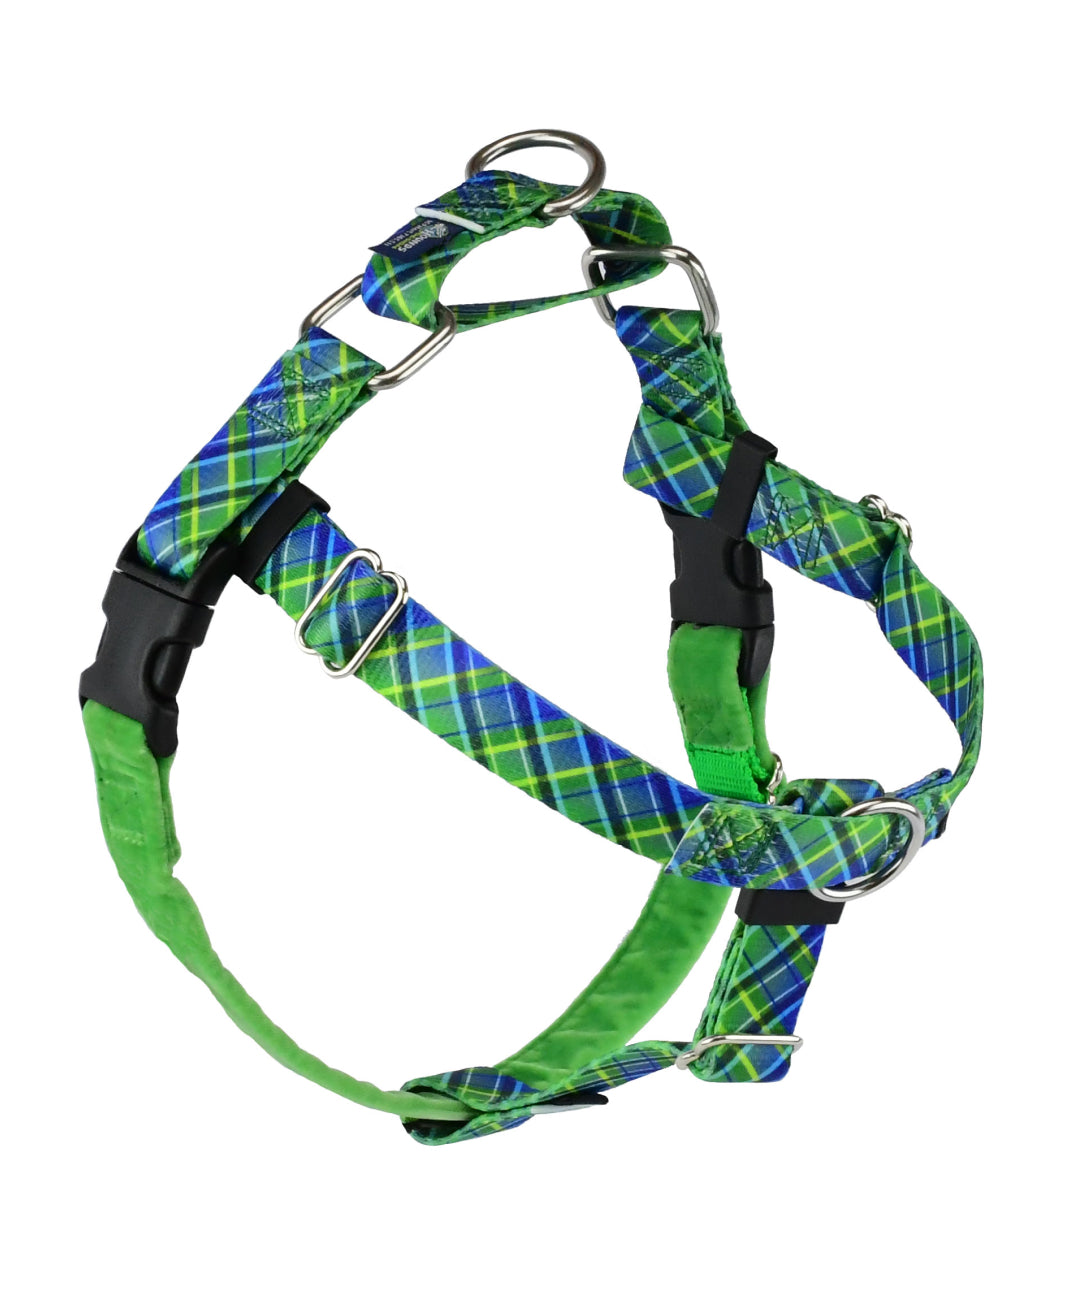 2 Hounds EarthStyle Freedom No-Pull Dog Harness Walking Gear Rover Store XS Green Plaid 